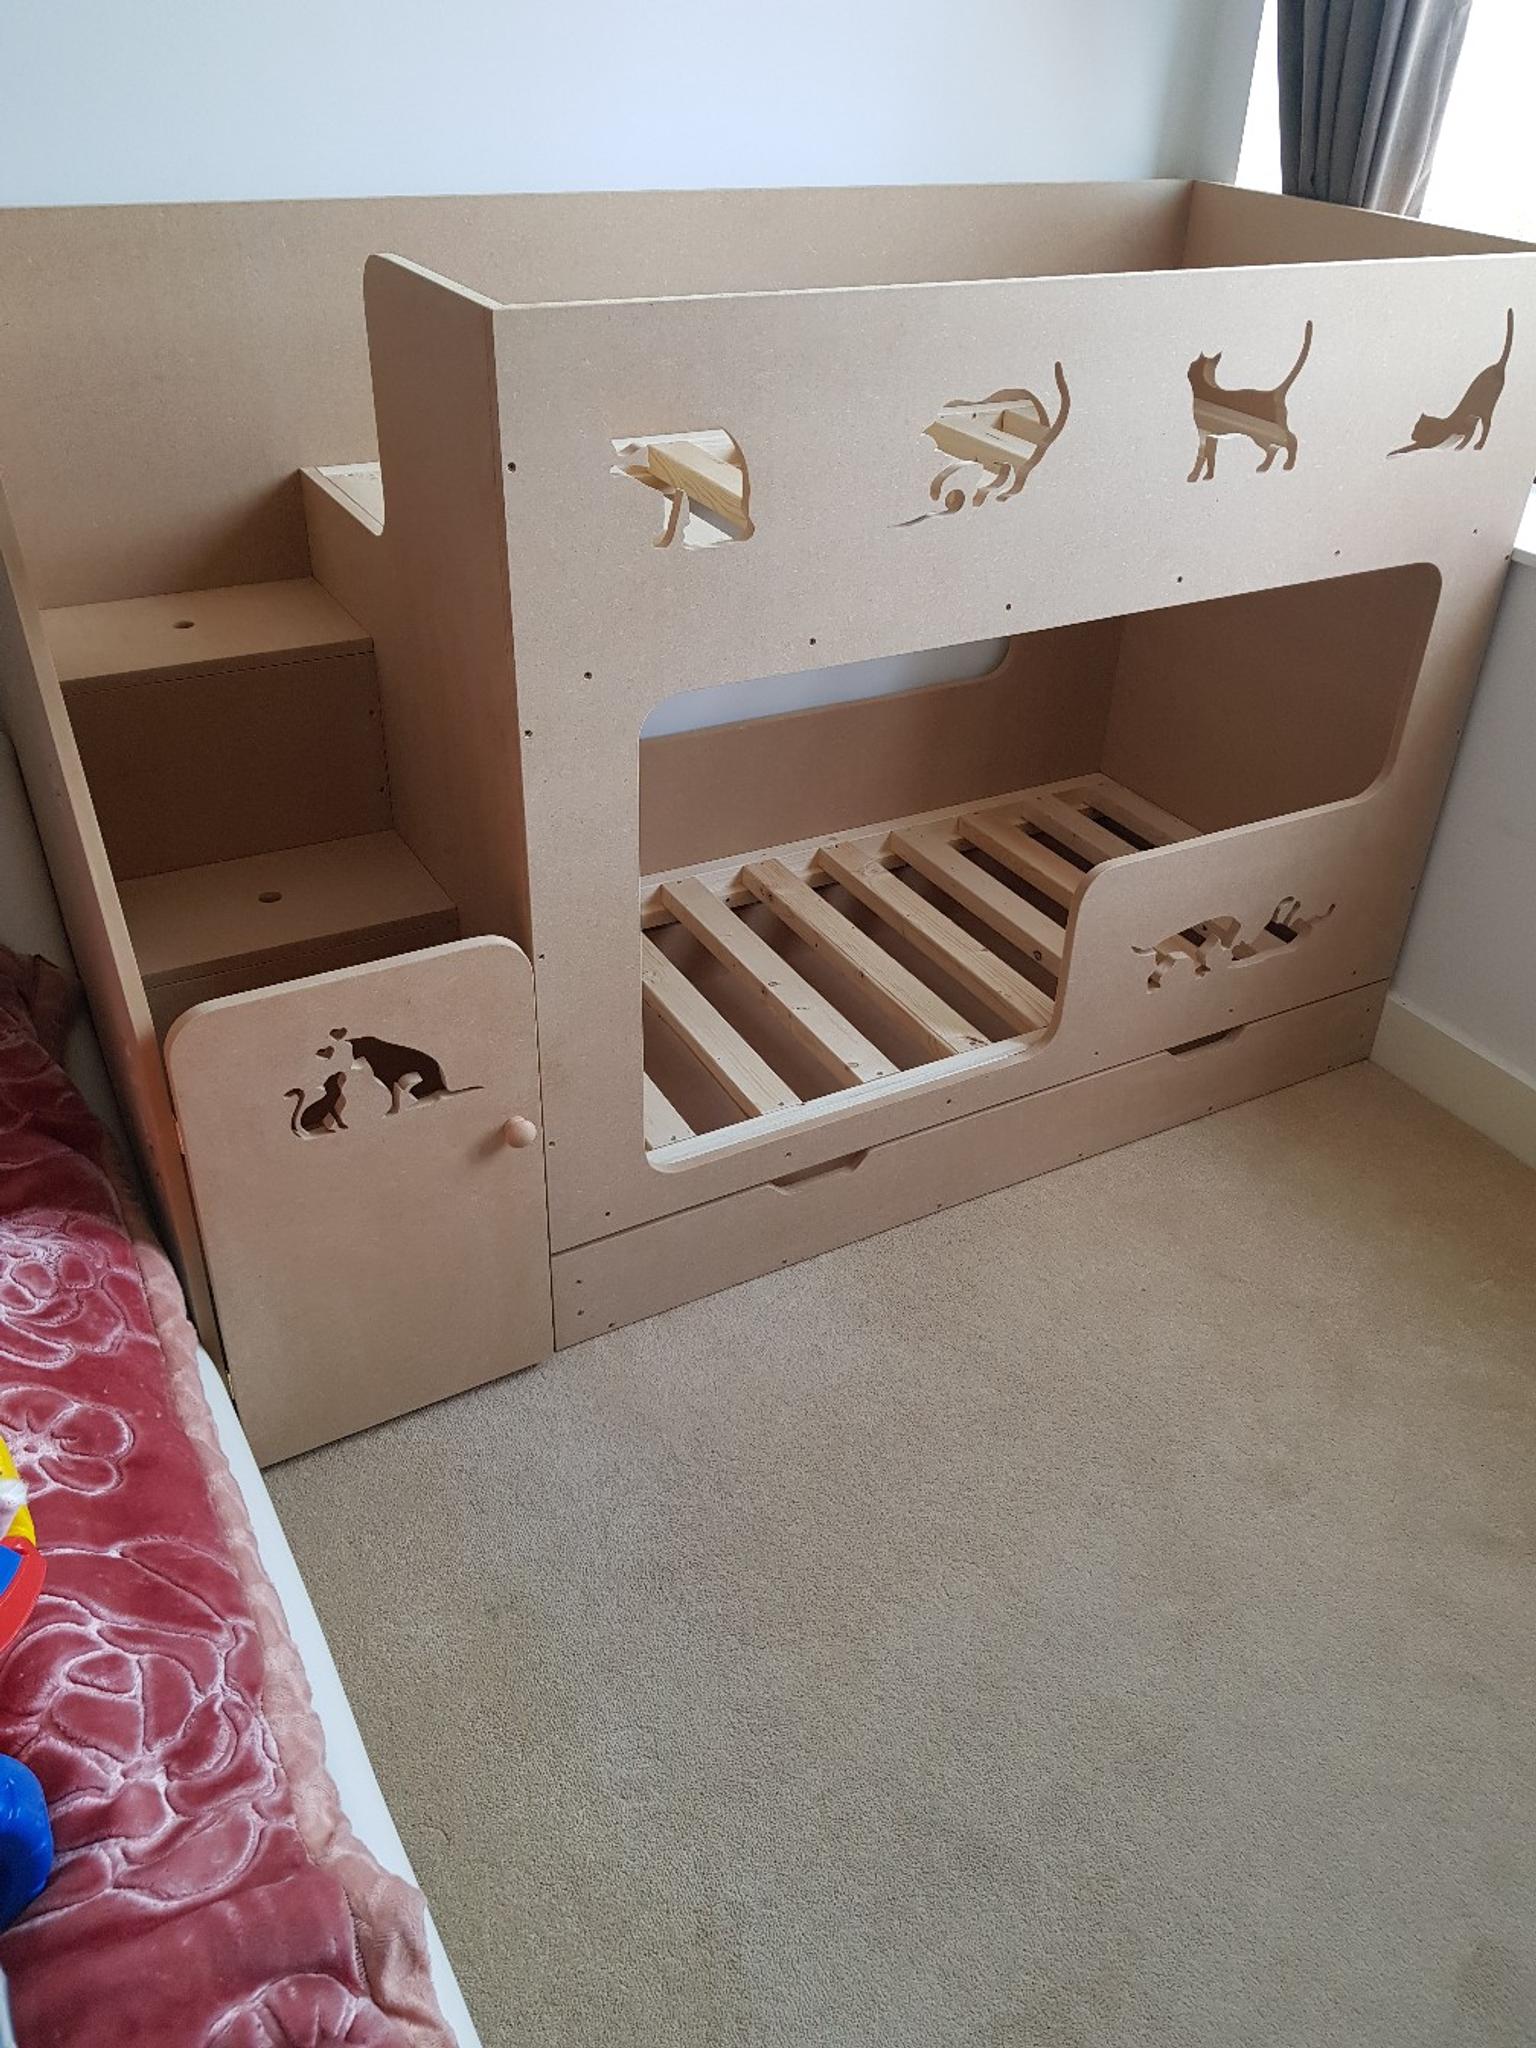 Toddler Bunk Bed In B31 Birmingham For, Do They Make Toddler Bunk Beds